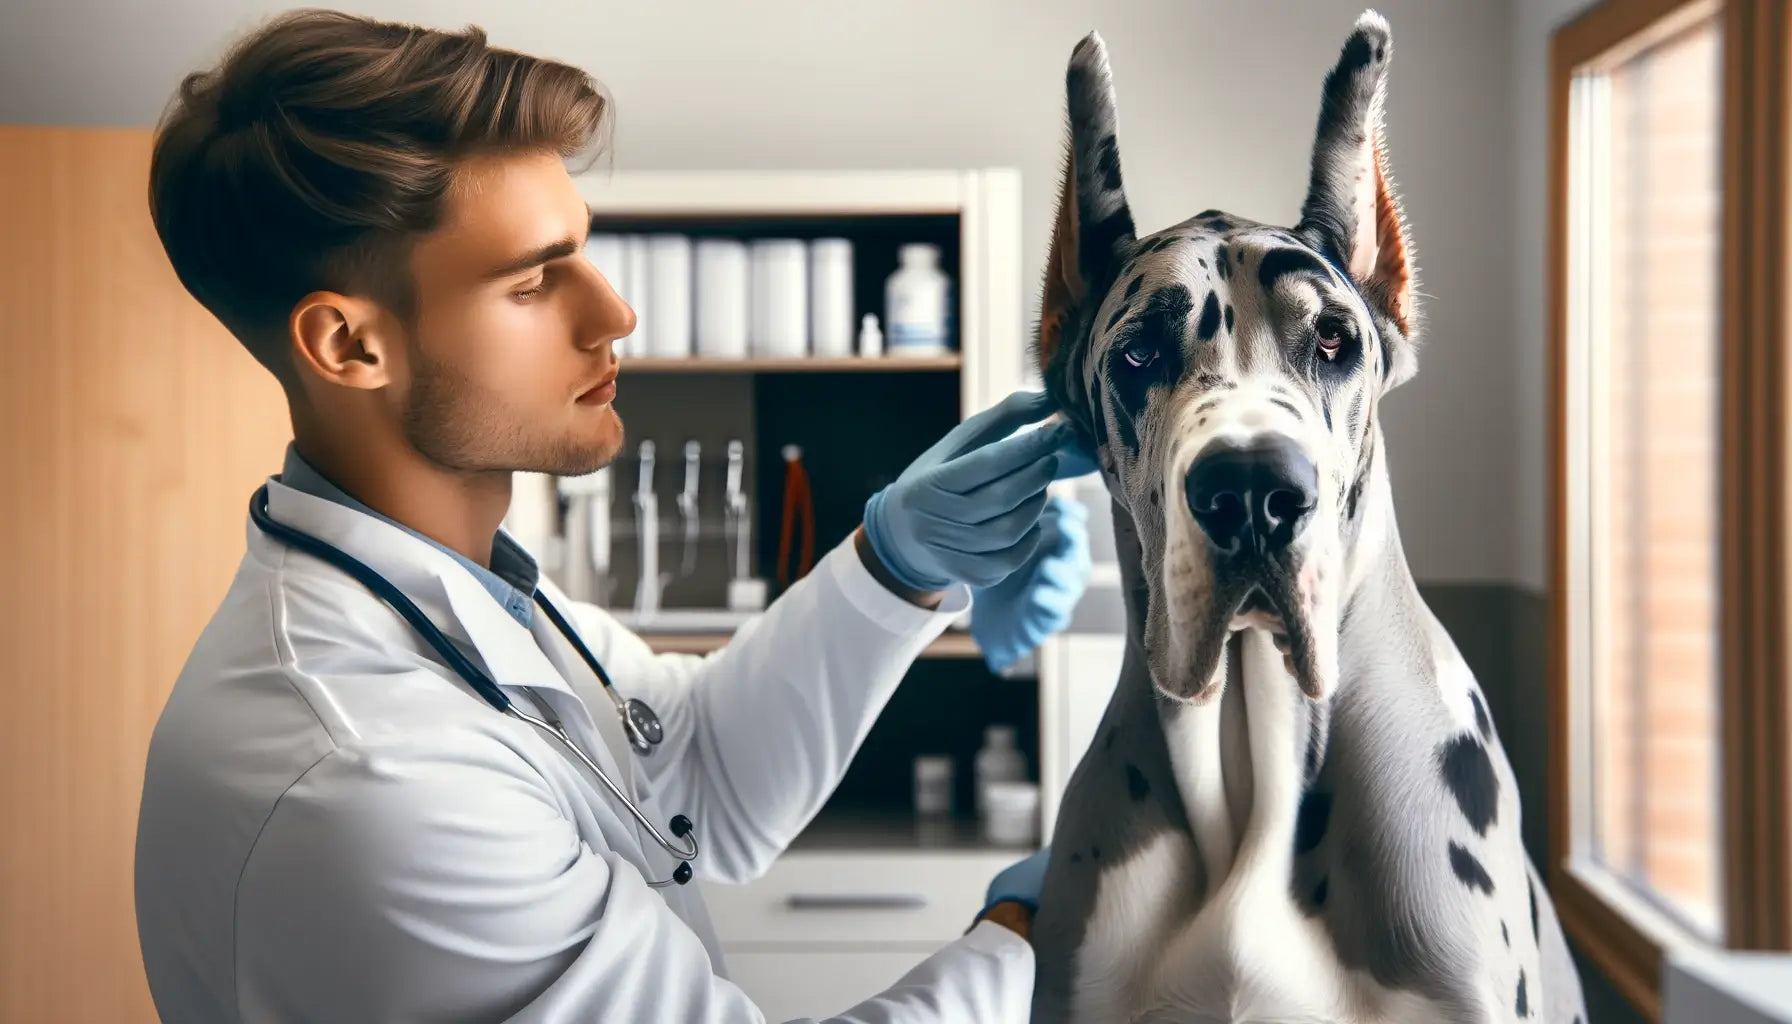 A Merle Great Dane receiving a health check from a veterinarian in a clinic, with the veterinarian examining the dog's ears, eyes, and teeth.